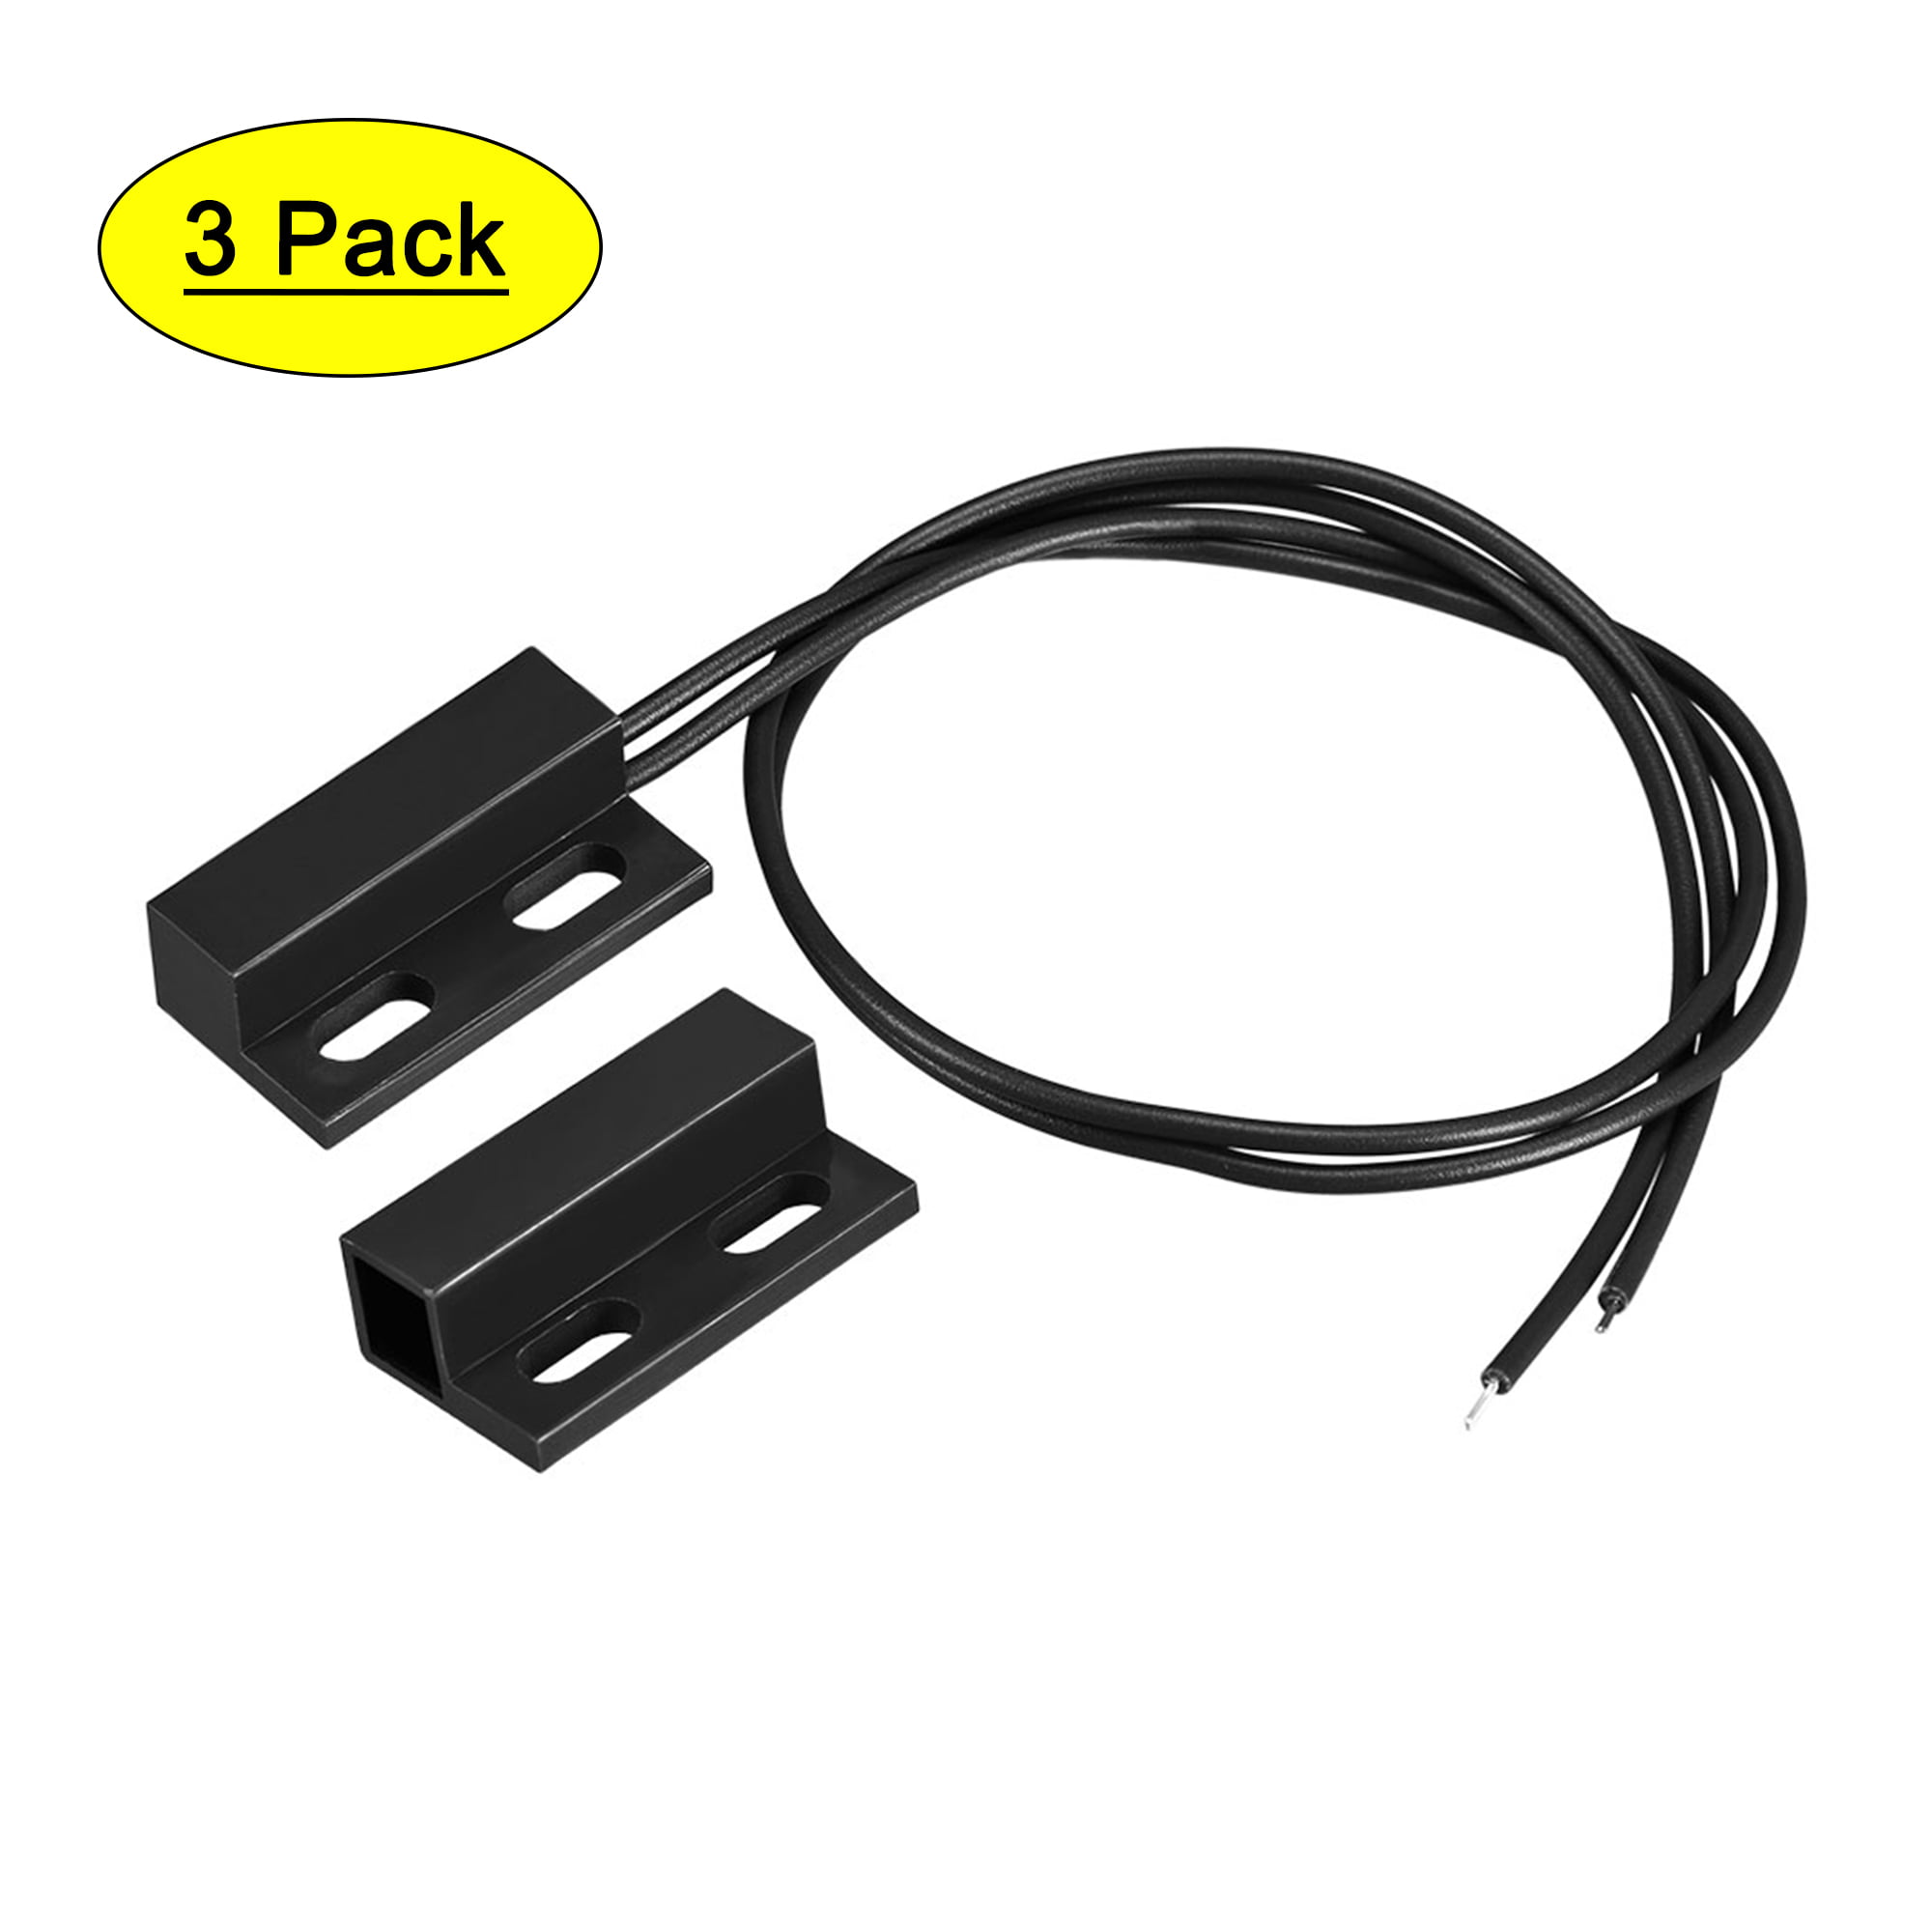 20 Sets Black Normally Closed Magnetic Switch Door Window Contact Reed Sensor